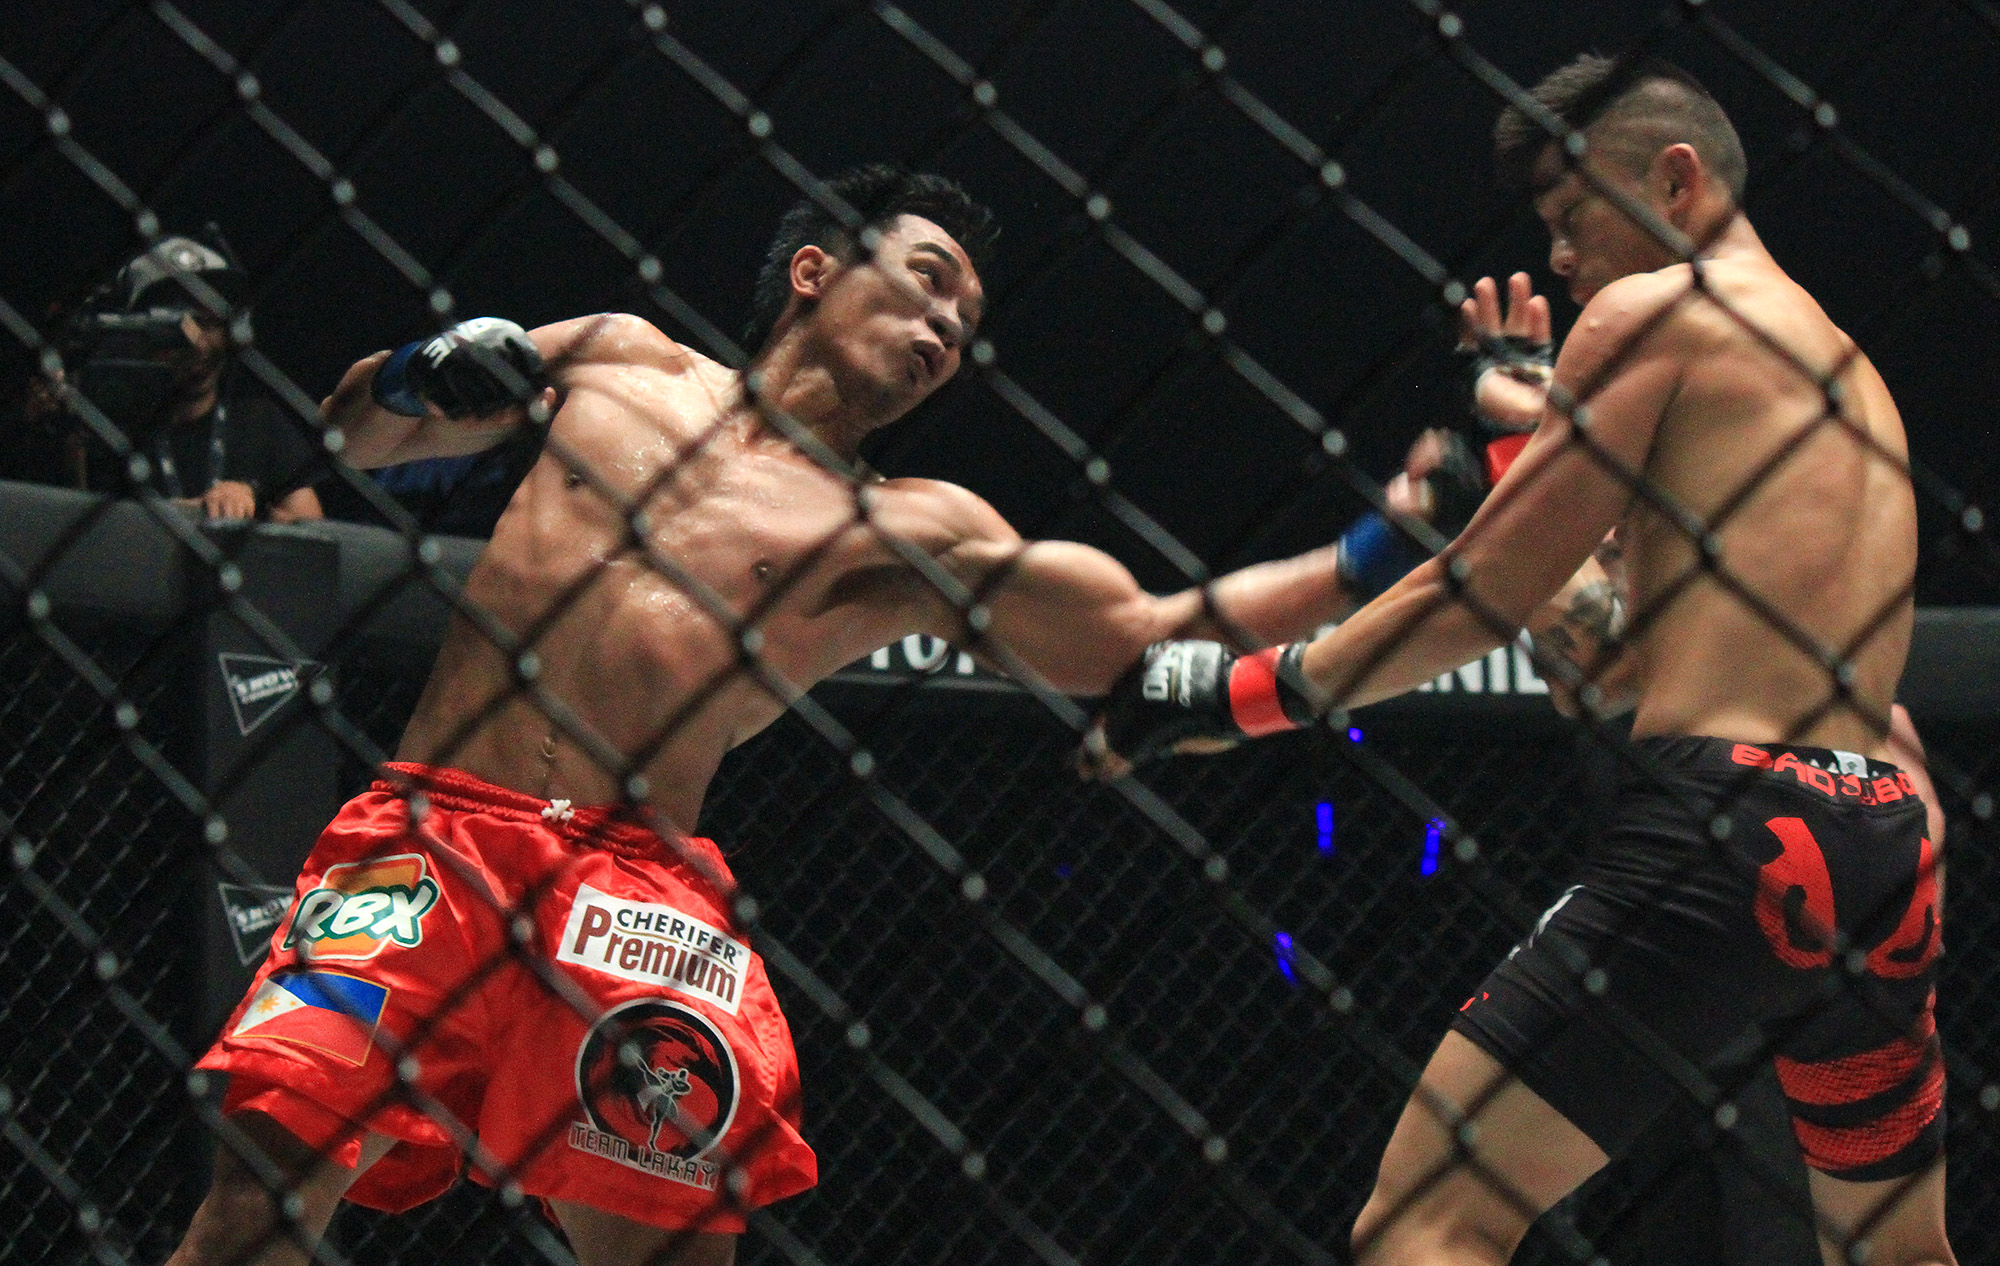 ONE Championship – The Home Of Martial Arts - The Home Of Martial Arts